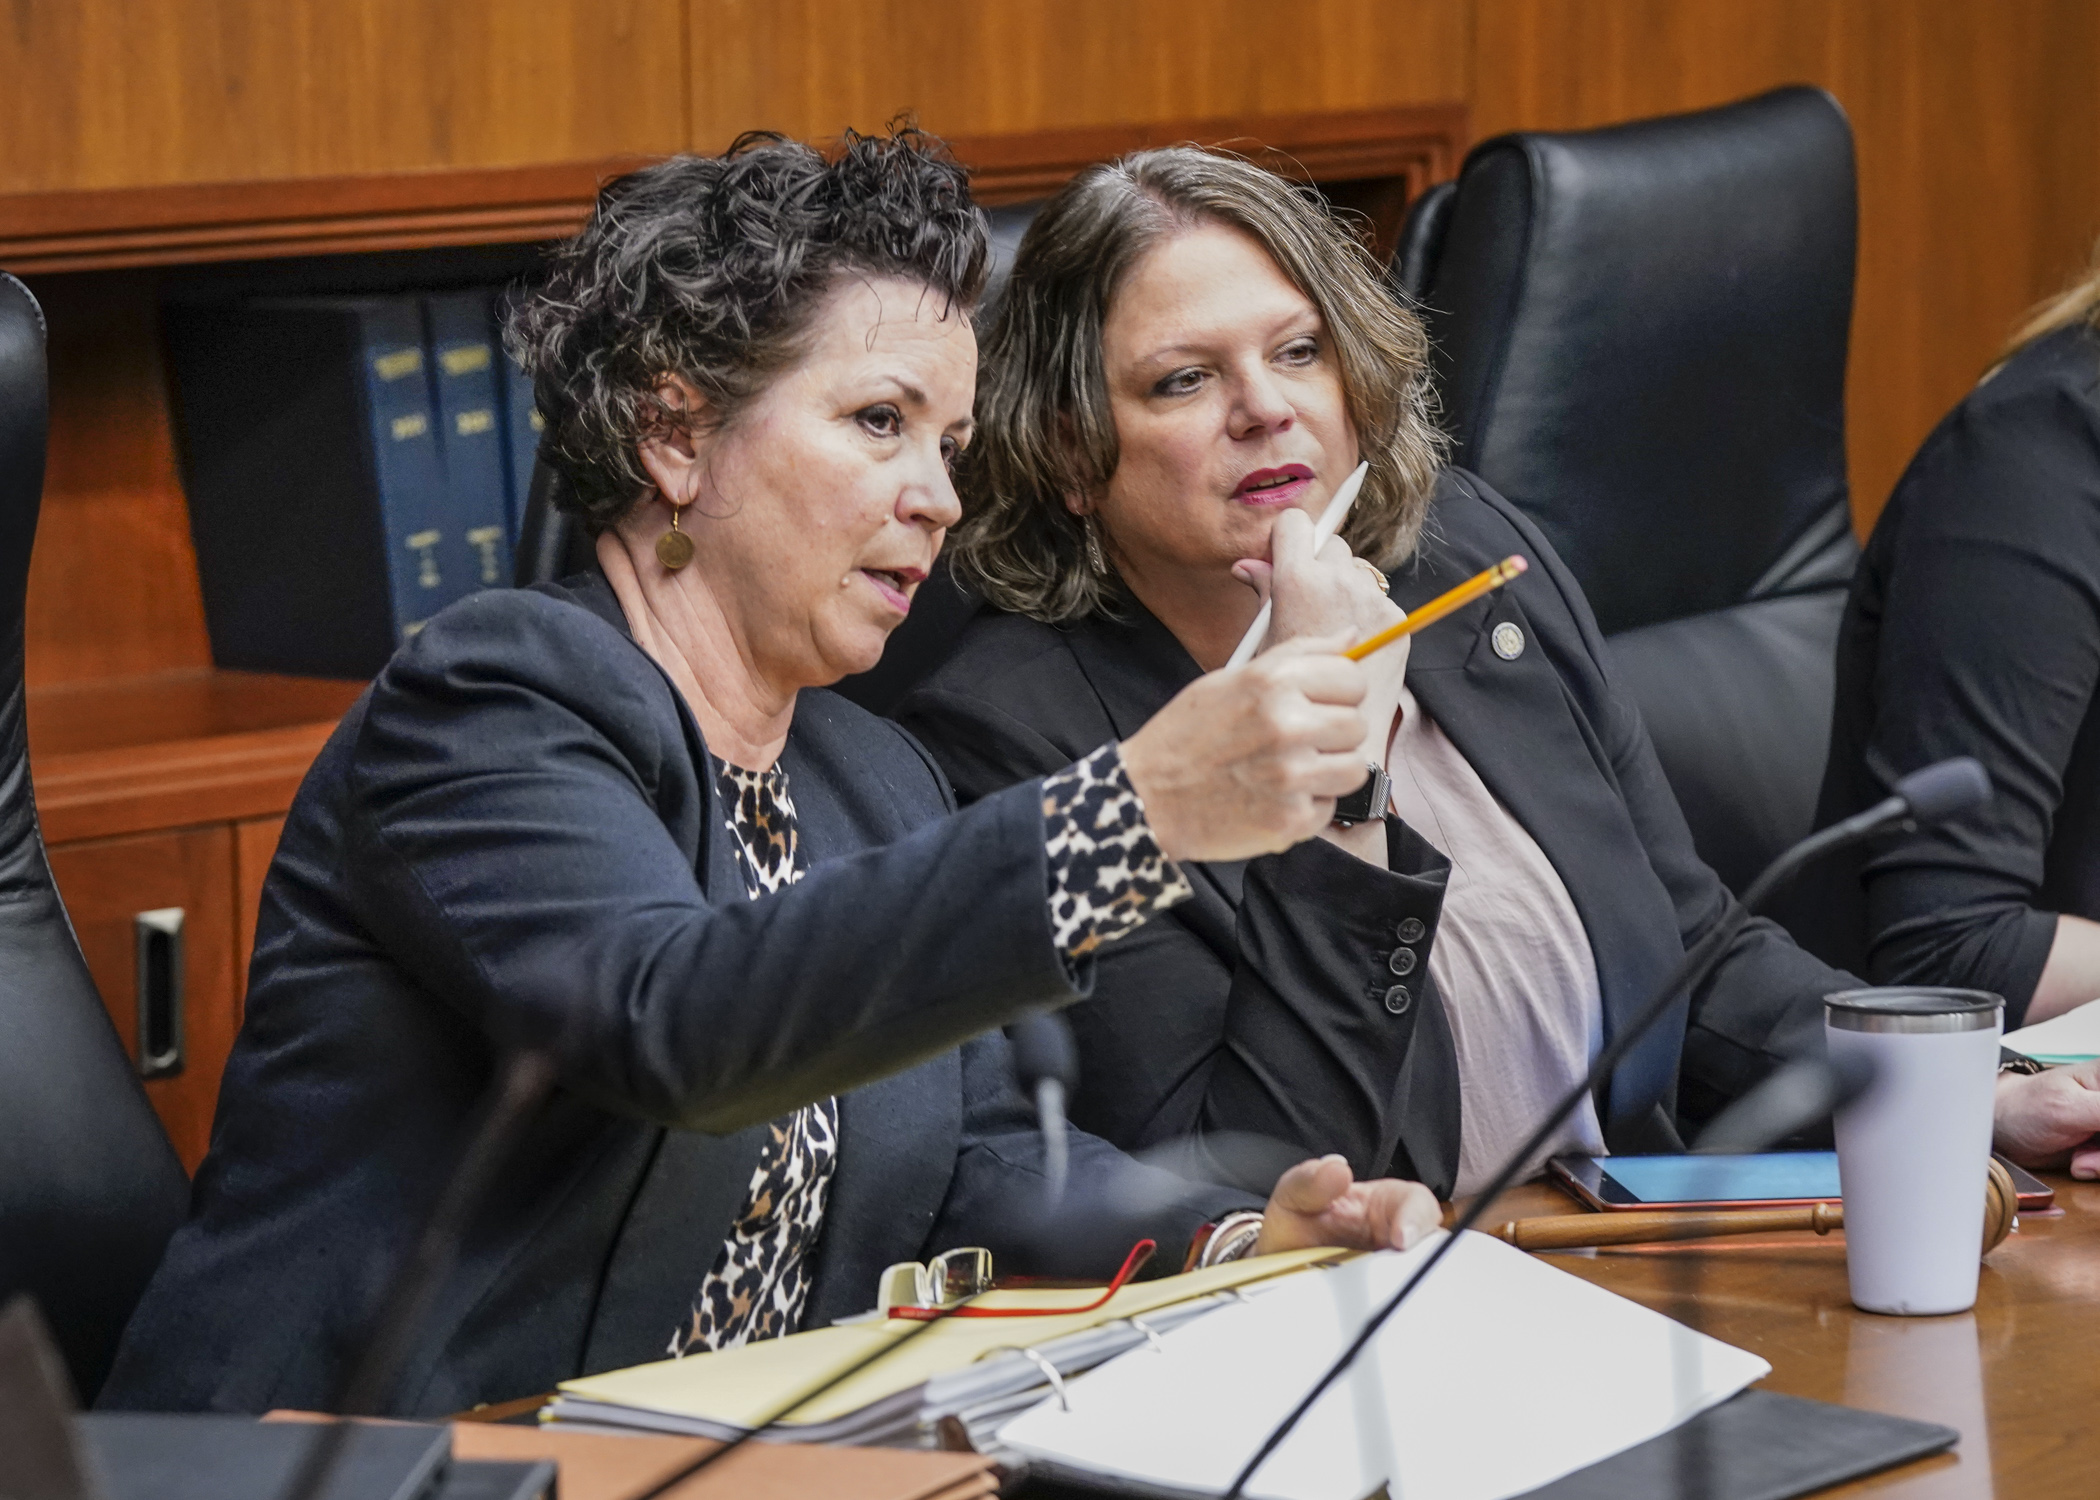 Sen. Mary Kunesh and Rep. Cheryl Youakim discuss the day’s procedures before gaveling in the conference committee on the omnibus education finance bill May 1. (Photo by Catherine Davis)